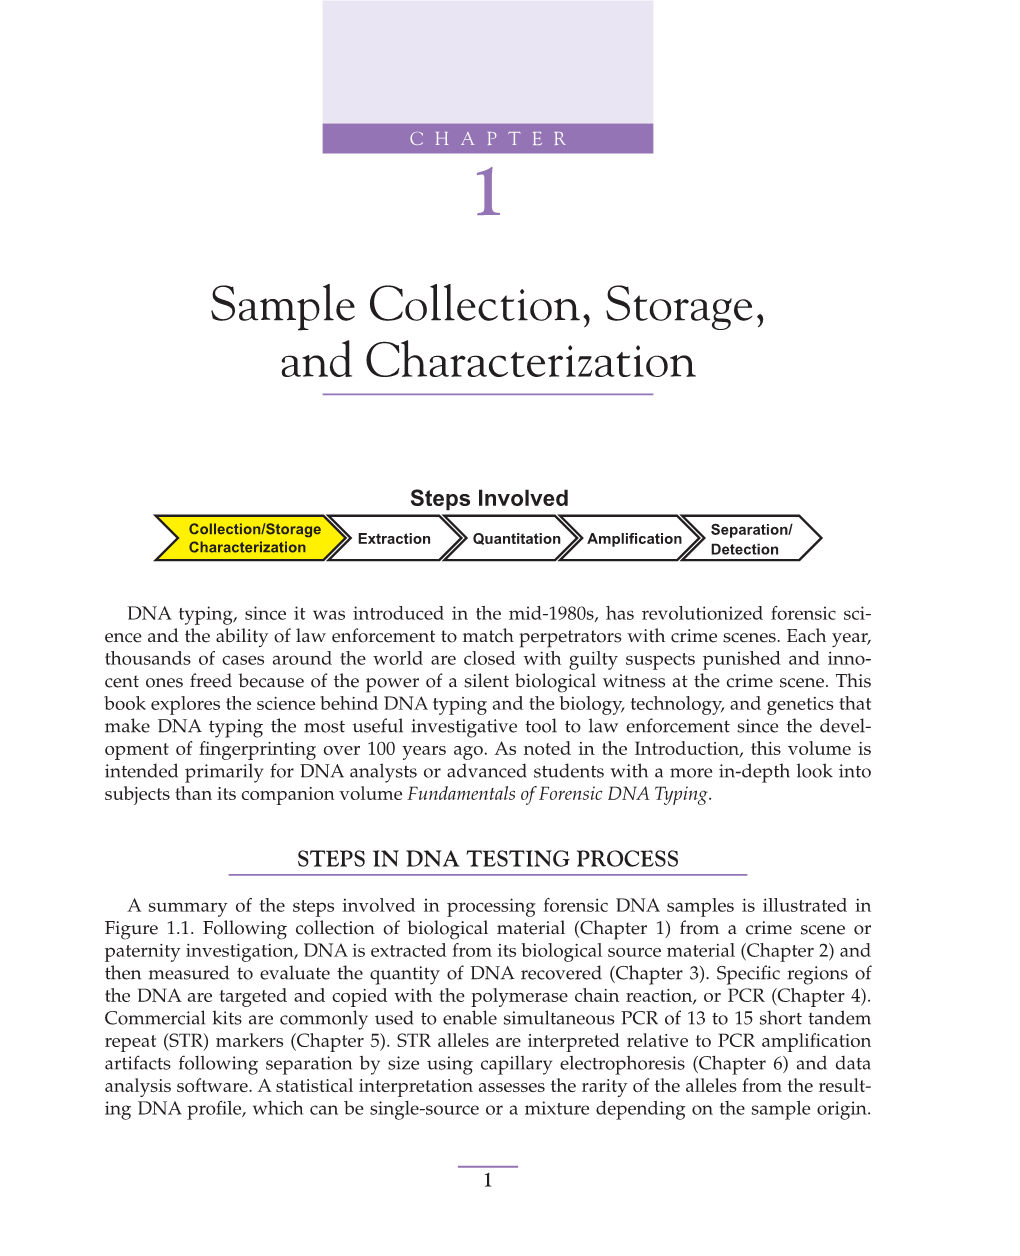 Sample Collection, Storage, and Characterization